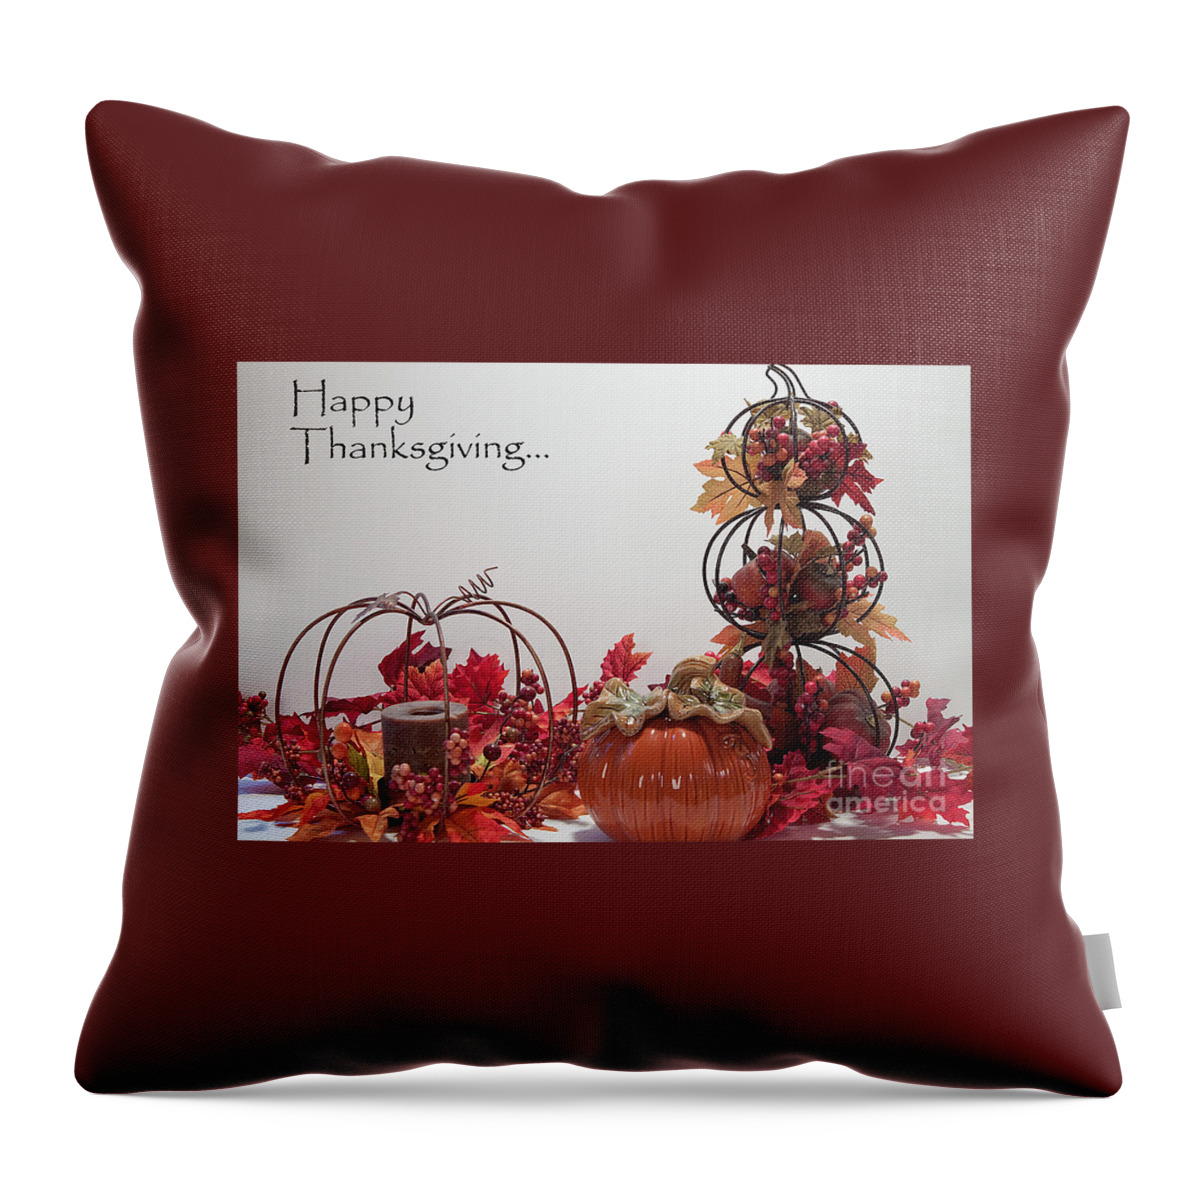 Thanksgiving Throw Pillow featuring the photograph Happy Thanksgiving to Friends and Family by Sherry Hallemeier